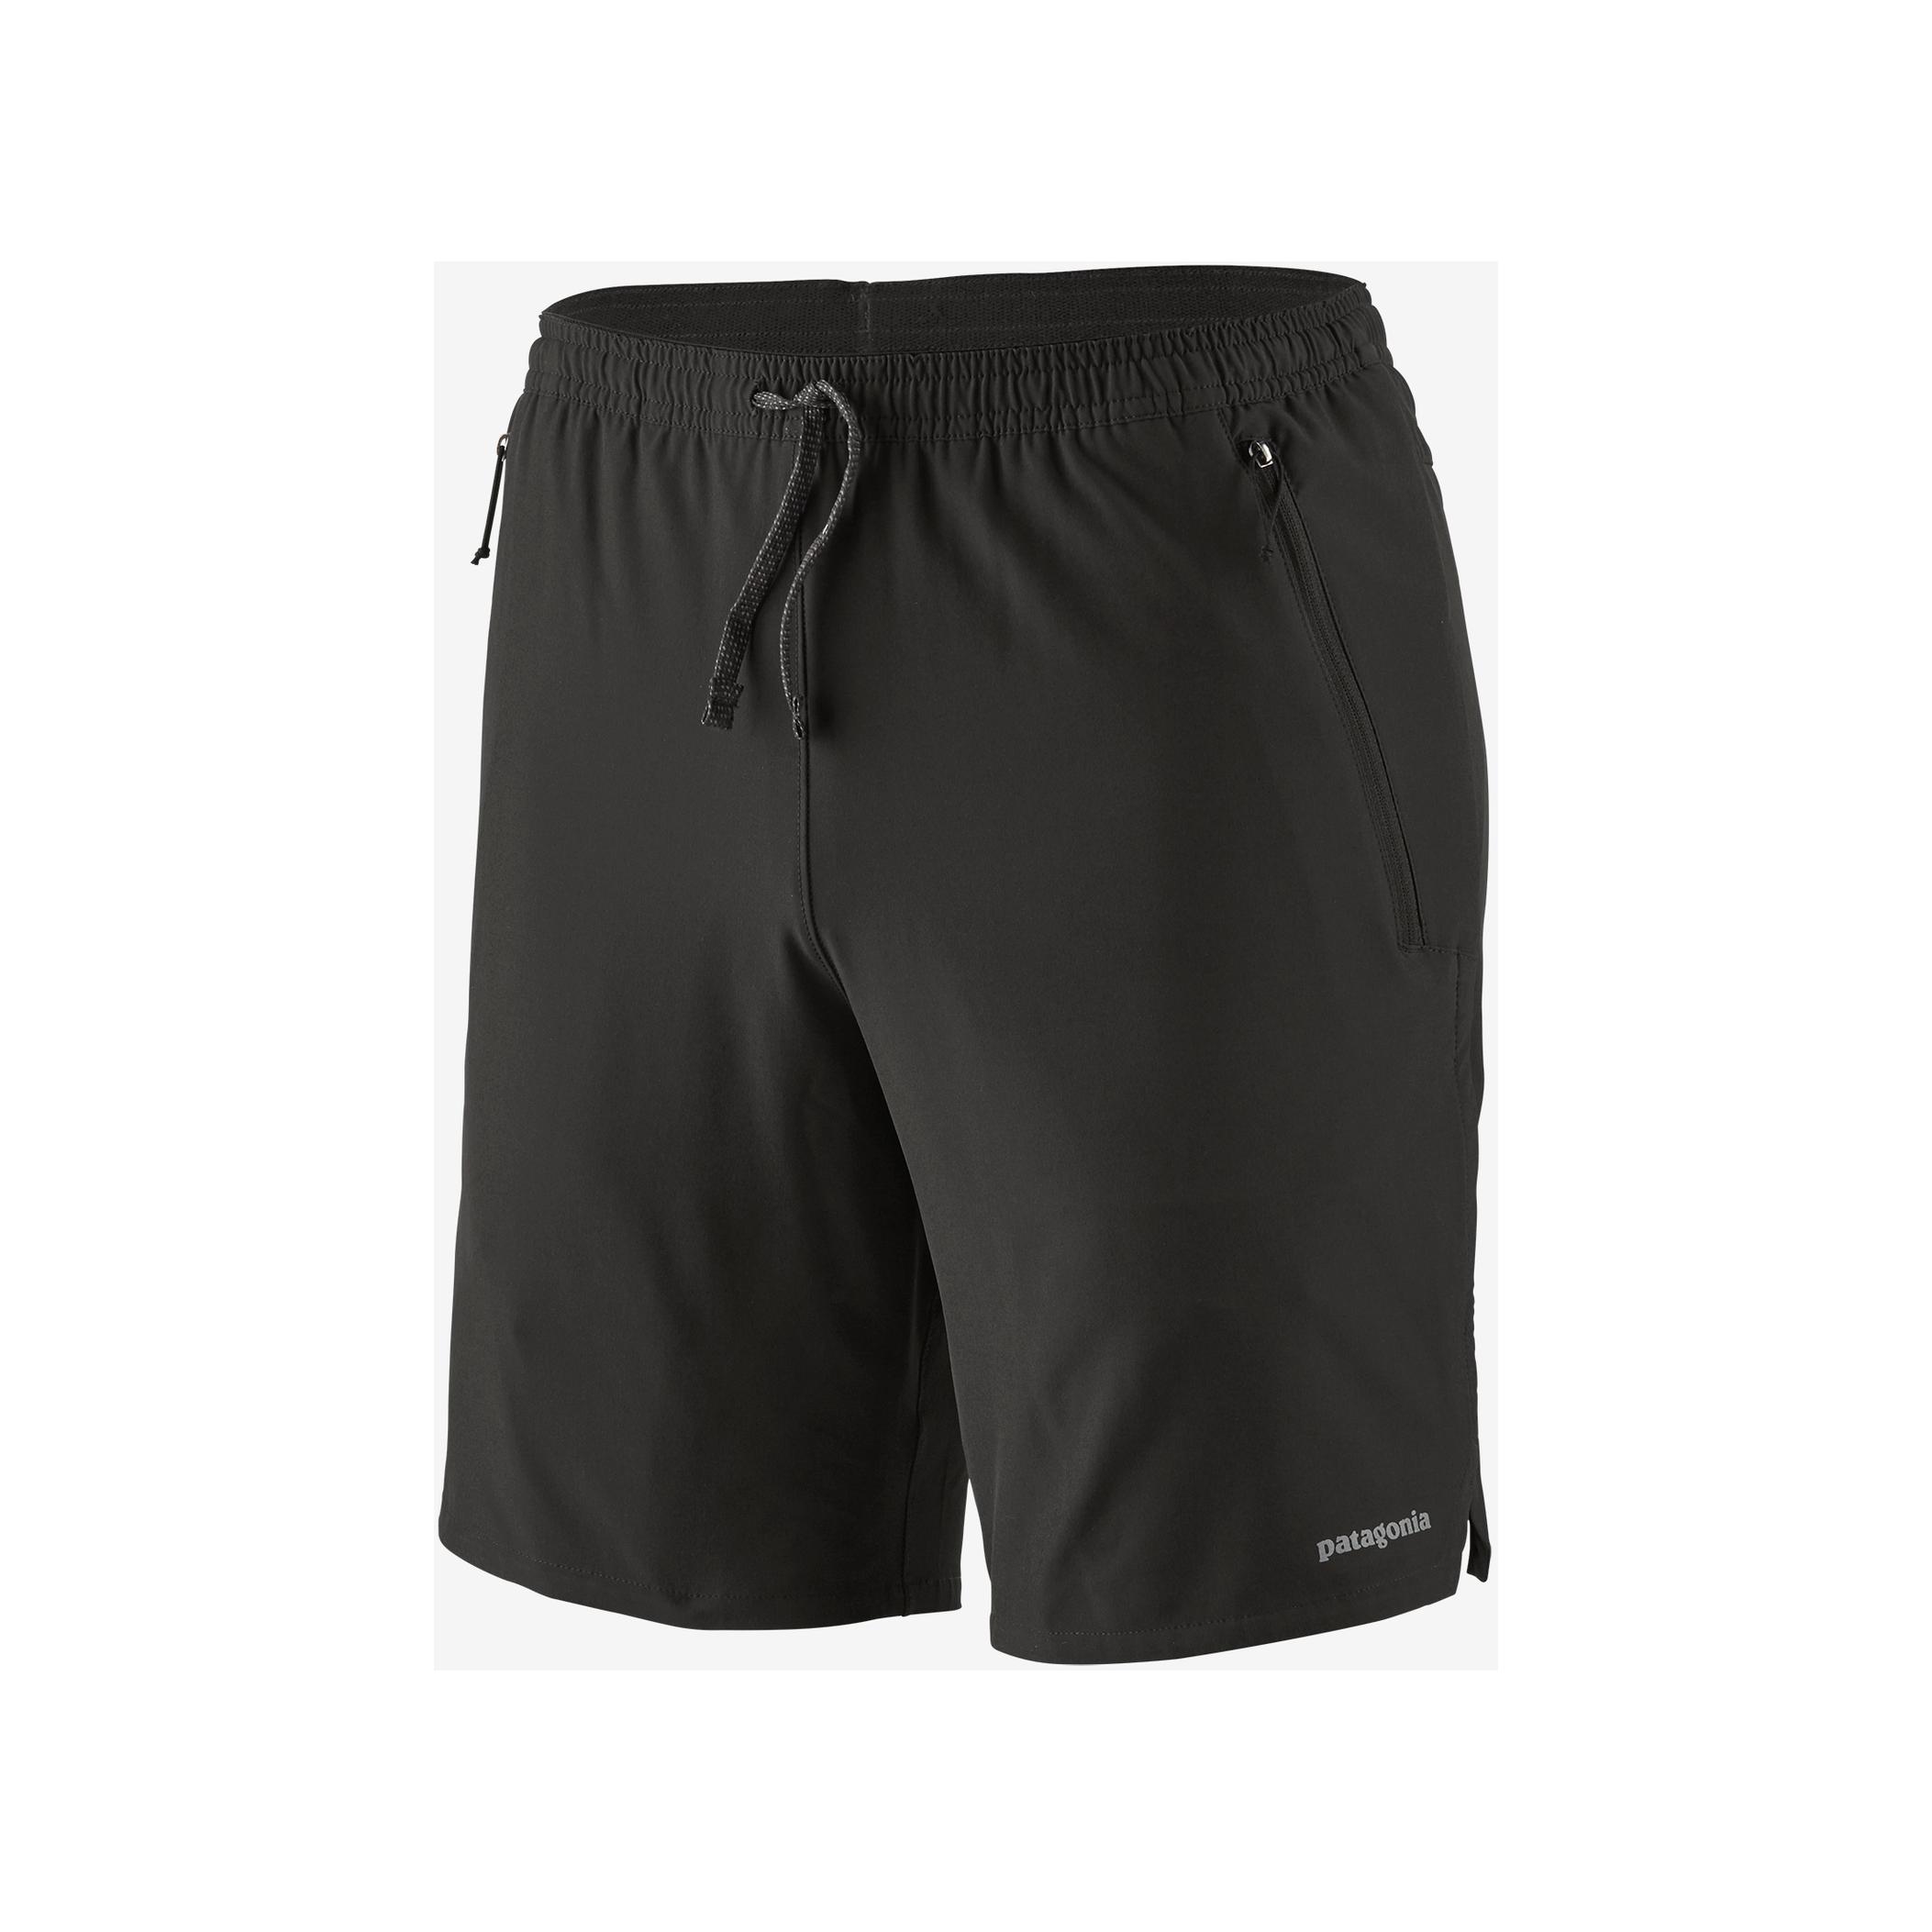 Patagonia Nine Trails Shorts 8 Inches Noir S 